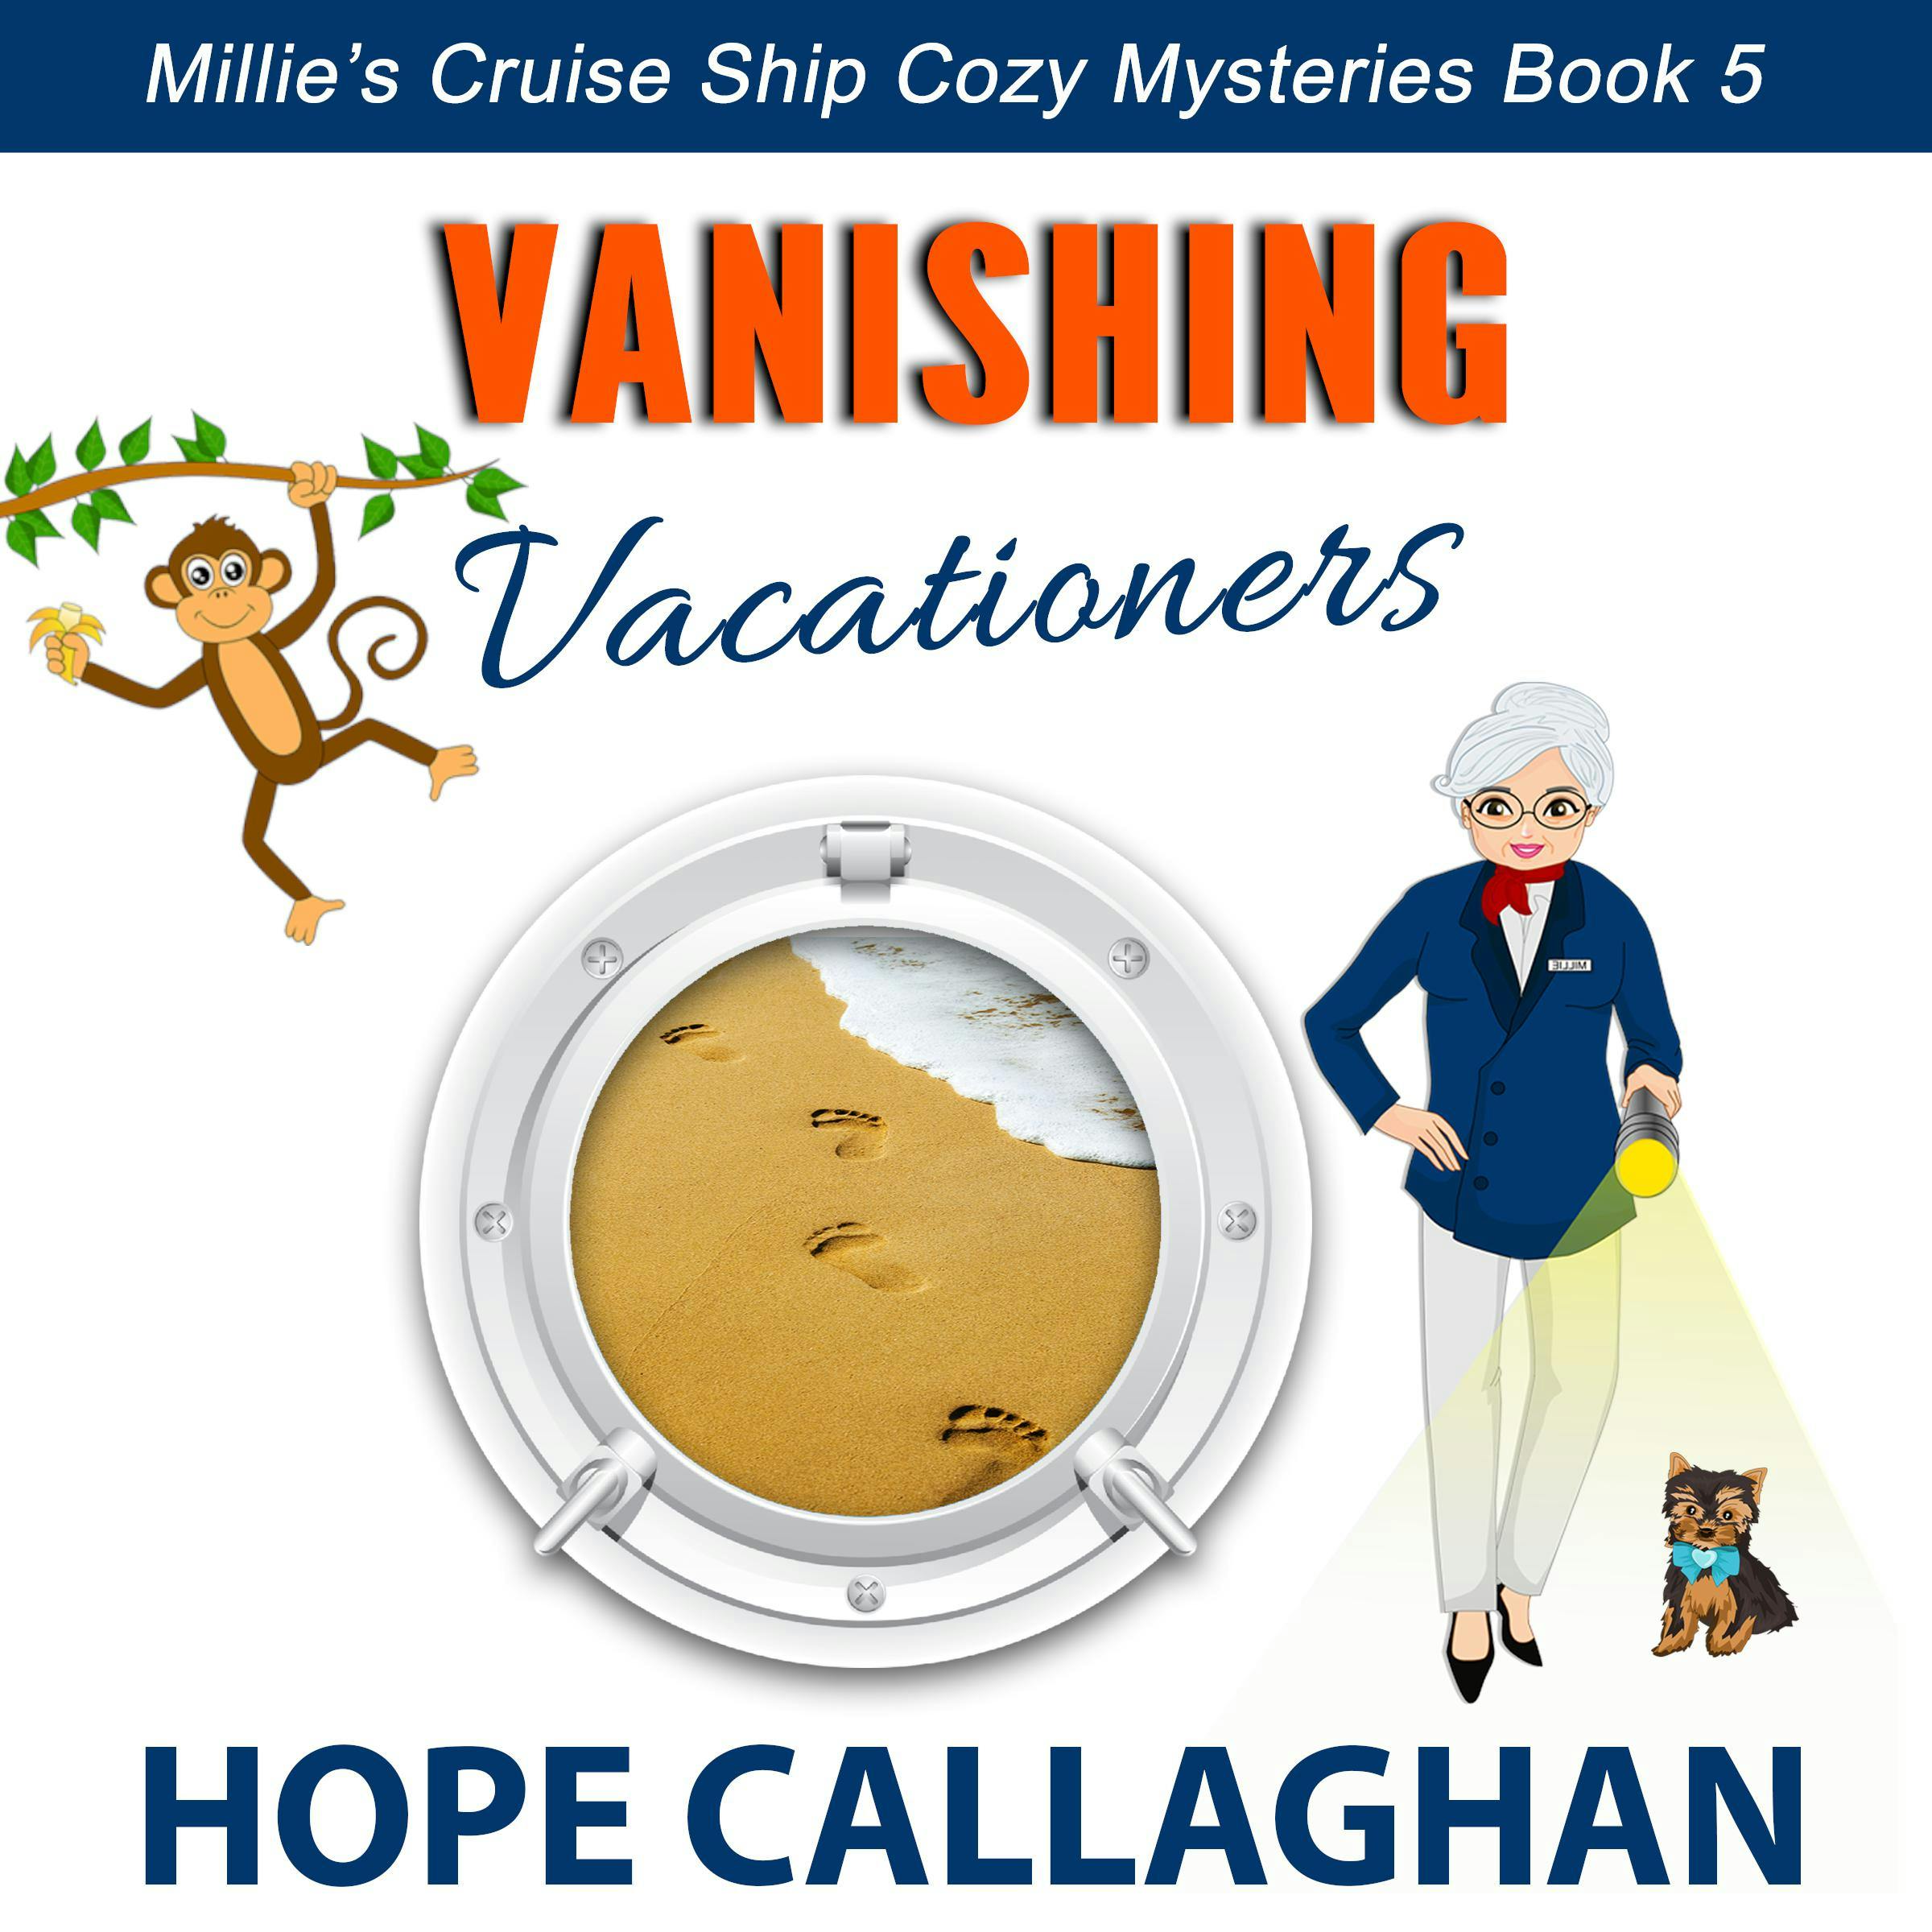 Vanishing Vacationers: A Cruise Ship Cozy Mystery - undefined